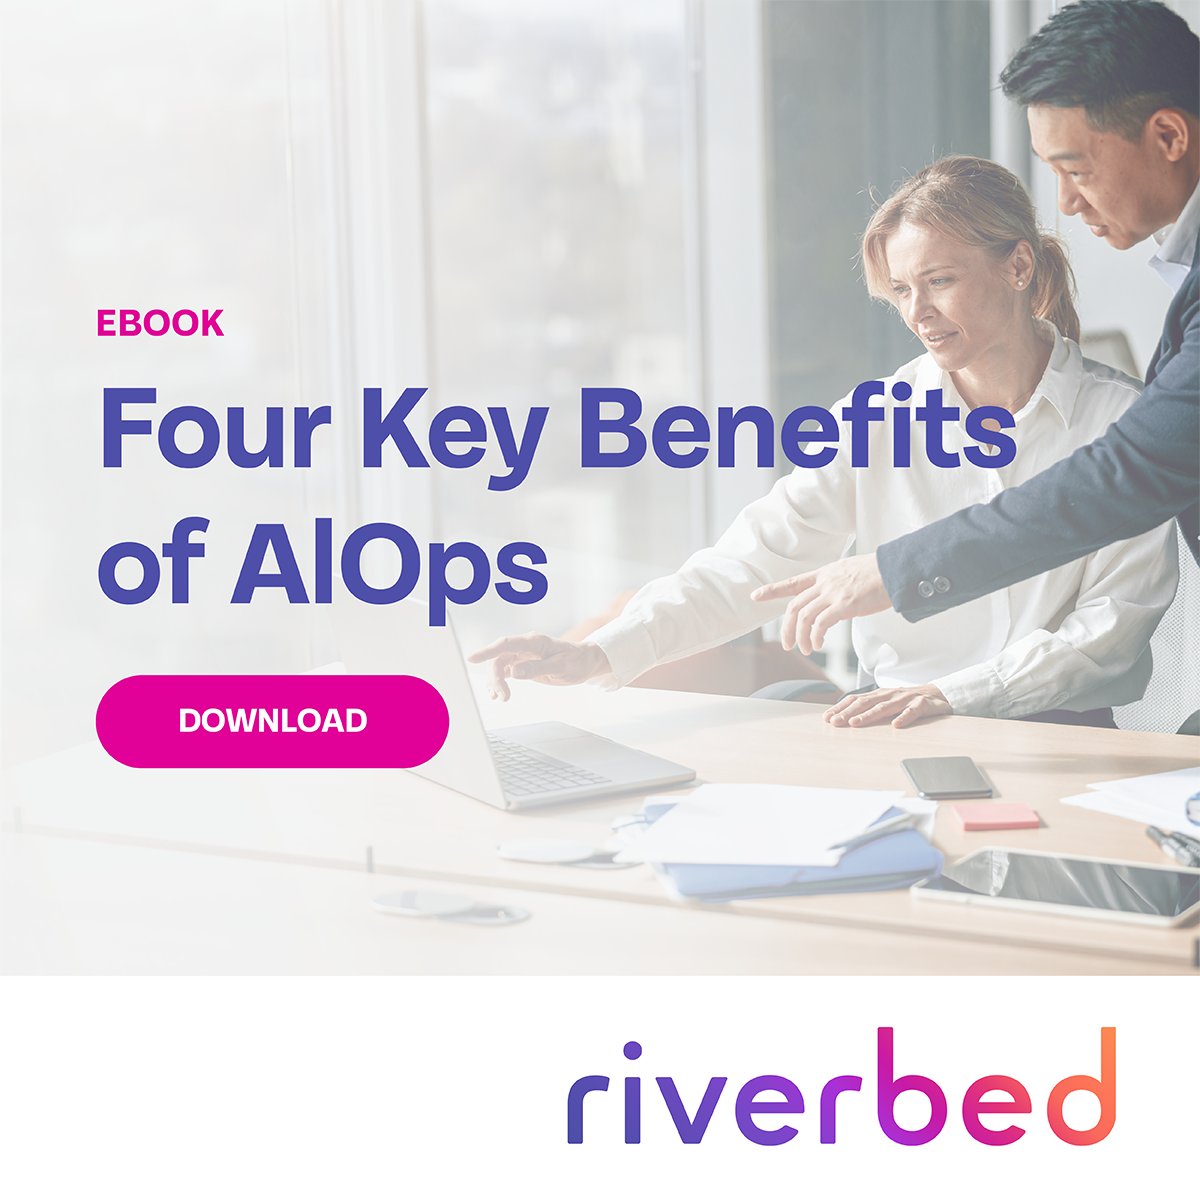 46% of IT leaders say that a top barrier to implementing #AIOps is the inability to grasp the full benefits. 😲 Our free eBook details four key benefits and critical use cases to help you navigate the complexities of modern IT operations. Download it here: rvbd.ly/3WPt7dq